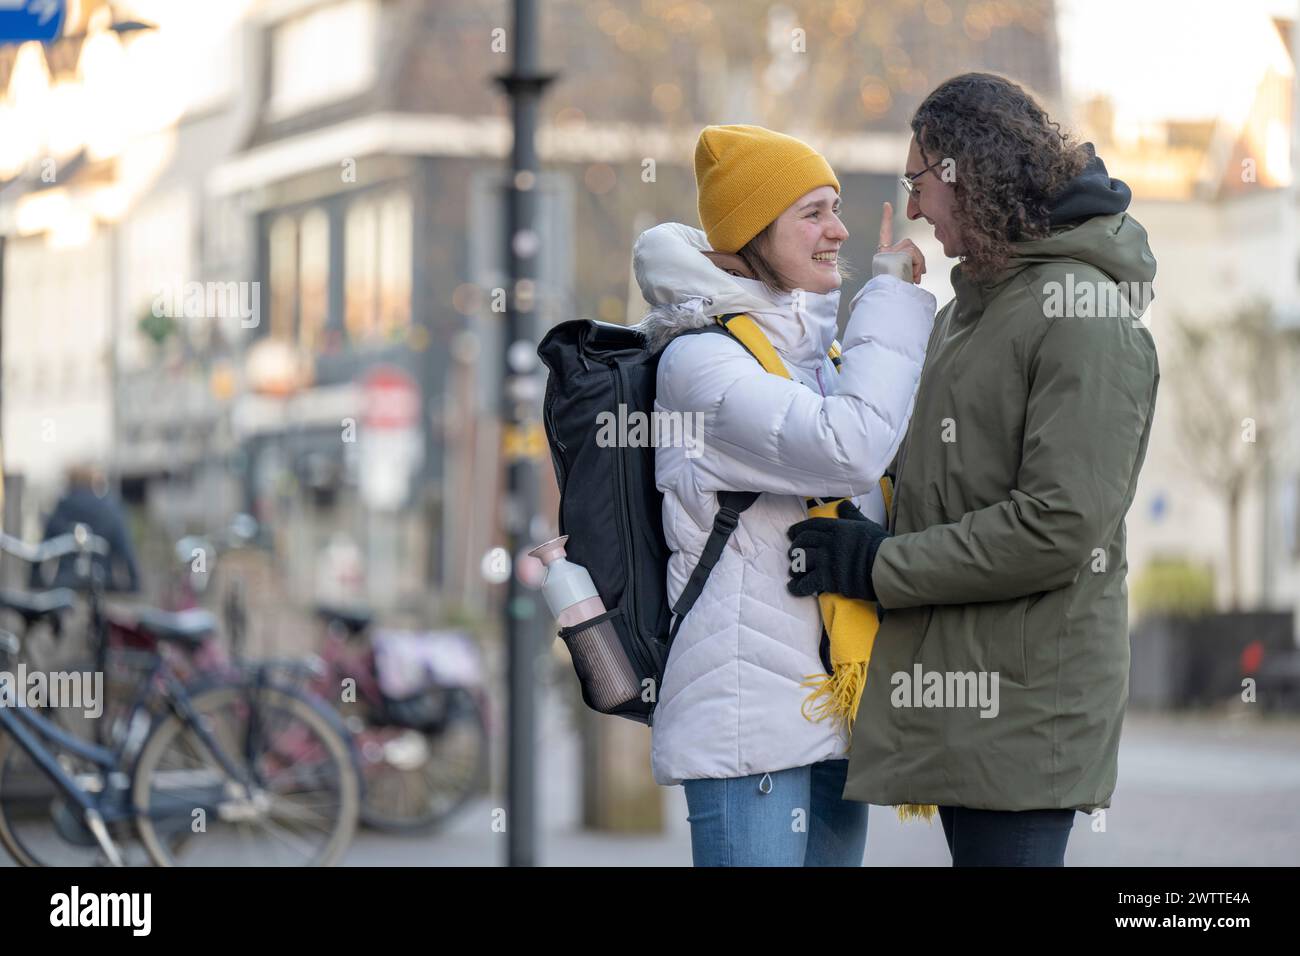 Two friends share a warm moment on a chilly city street. Stock Photo